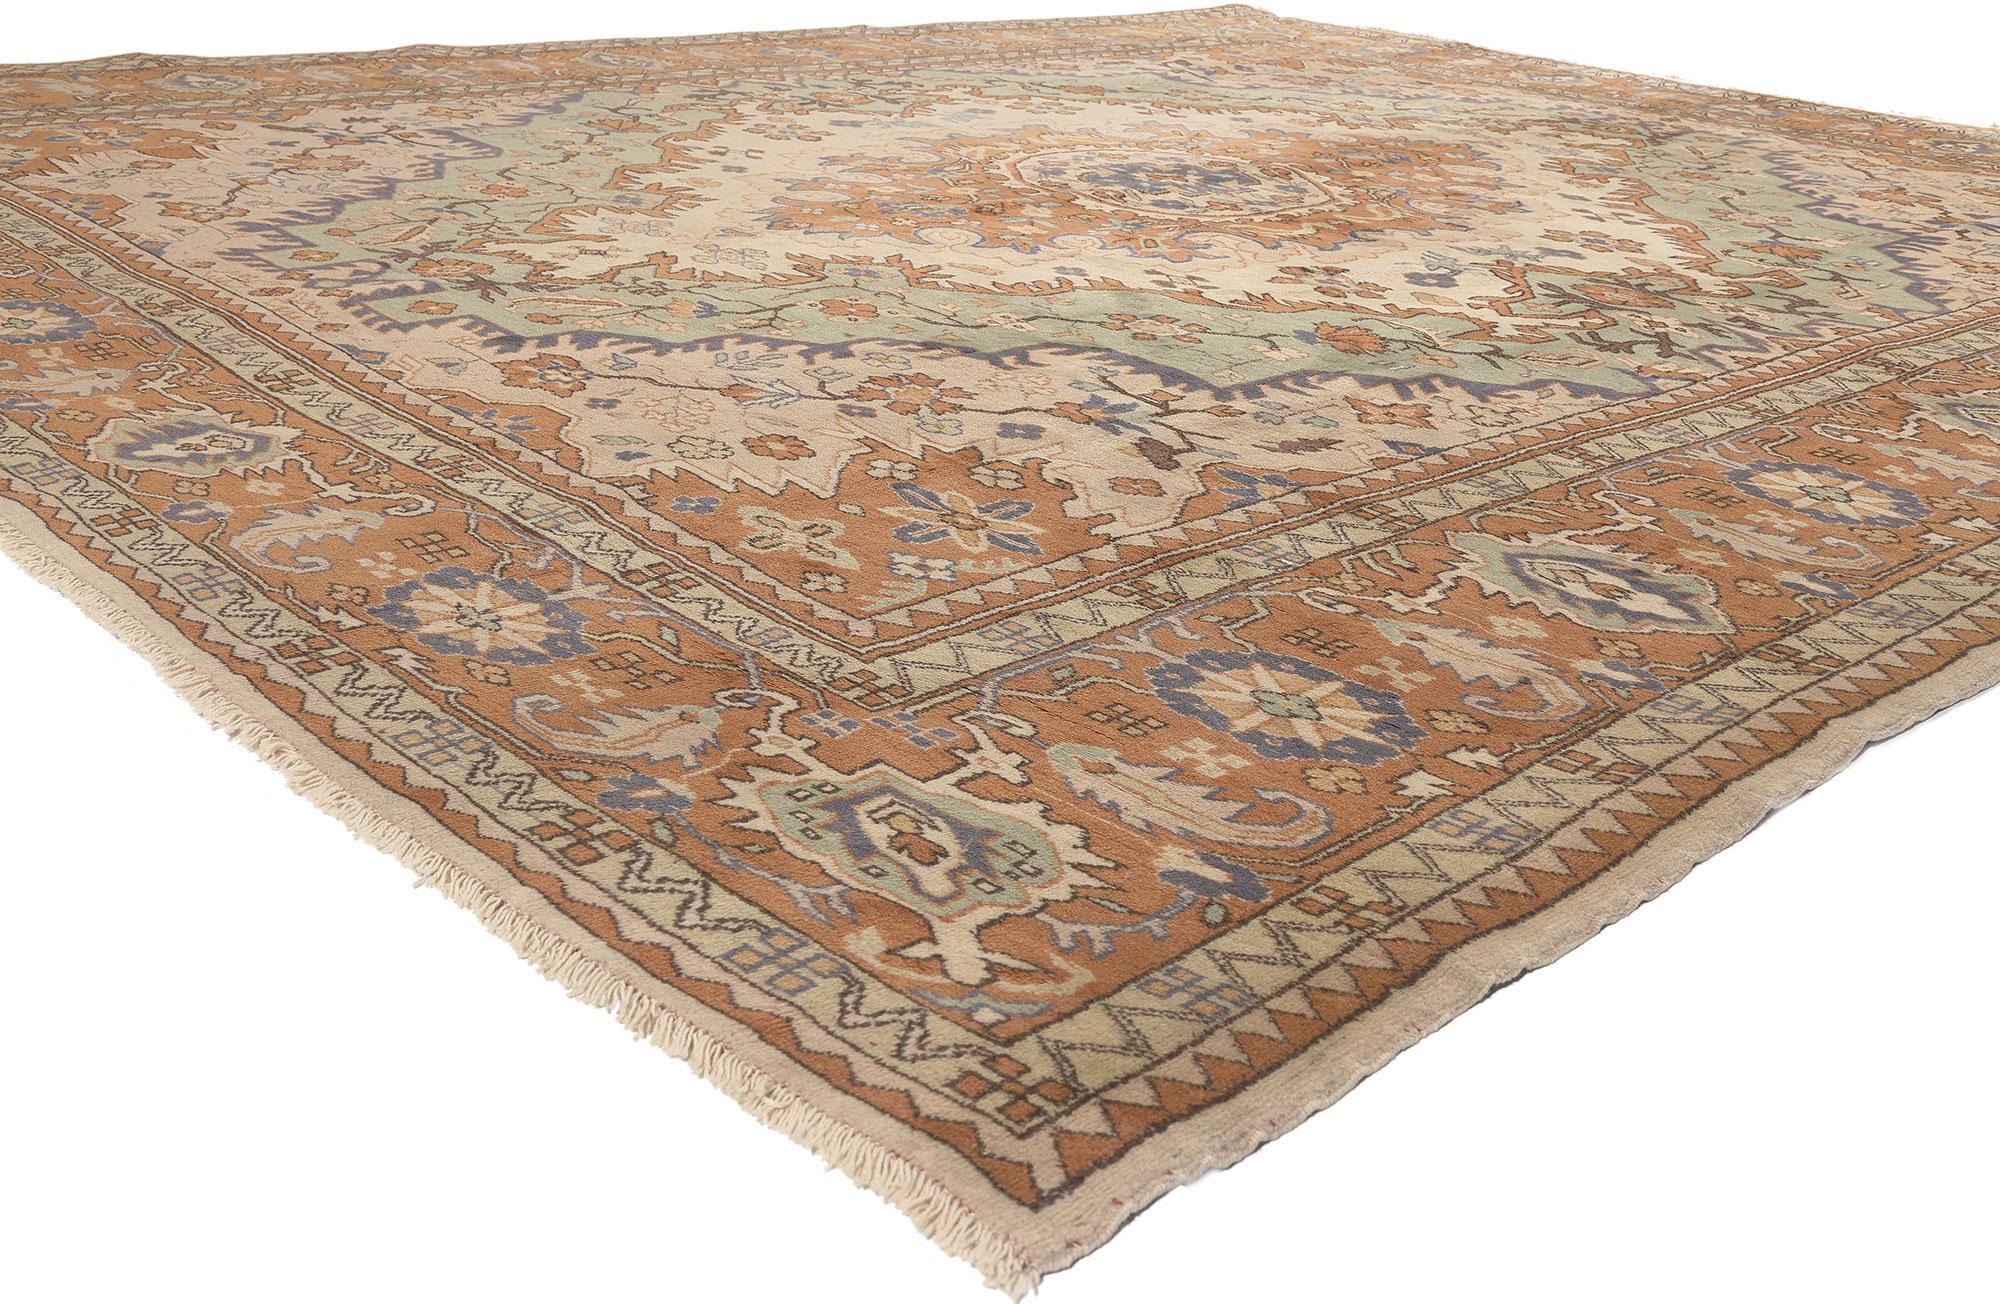 72024 Vintage Turkish Rug,10'02 X 12'05. 
Arts and Crafts style meets subtle sophistication in this hand knotted wool vintage Turkish rug. The intricate botanical design and soft earthy-inspired hues woven into this piece work together resulting in